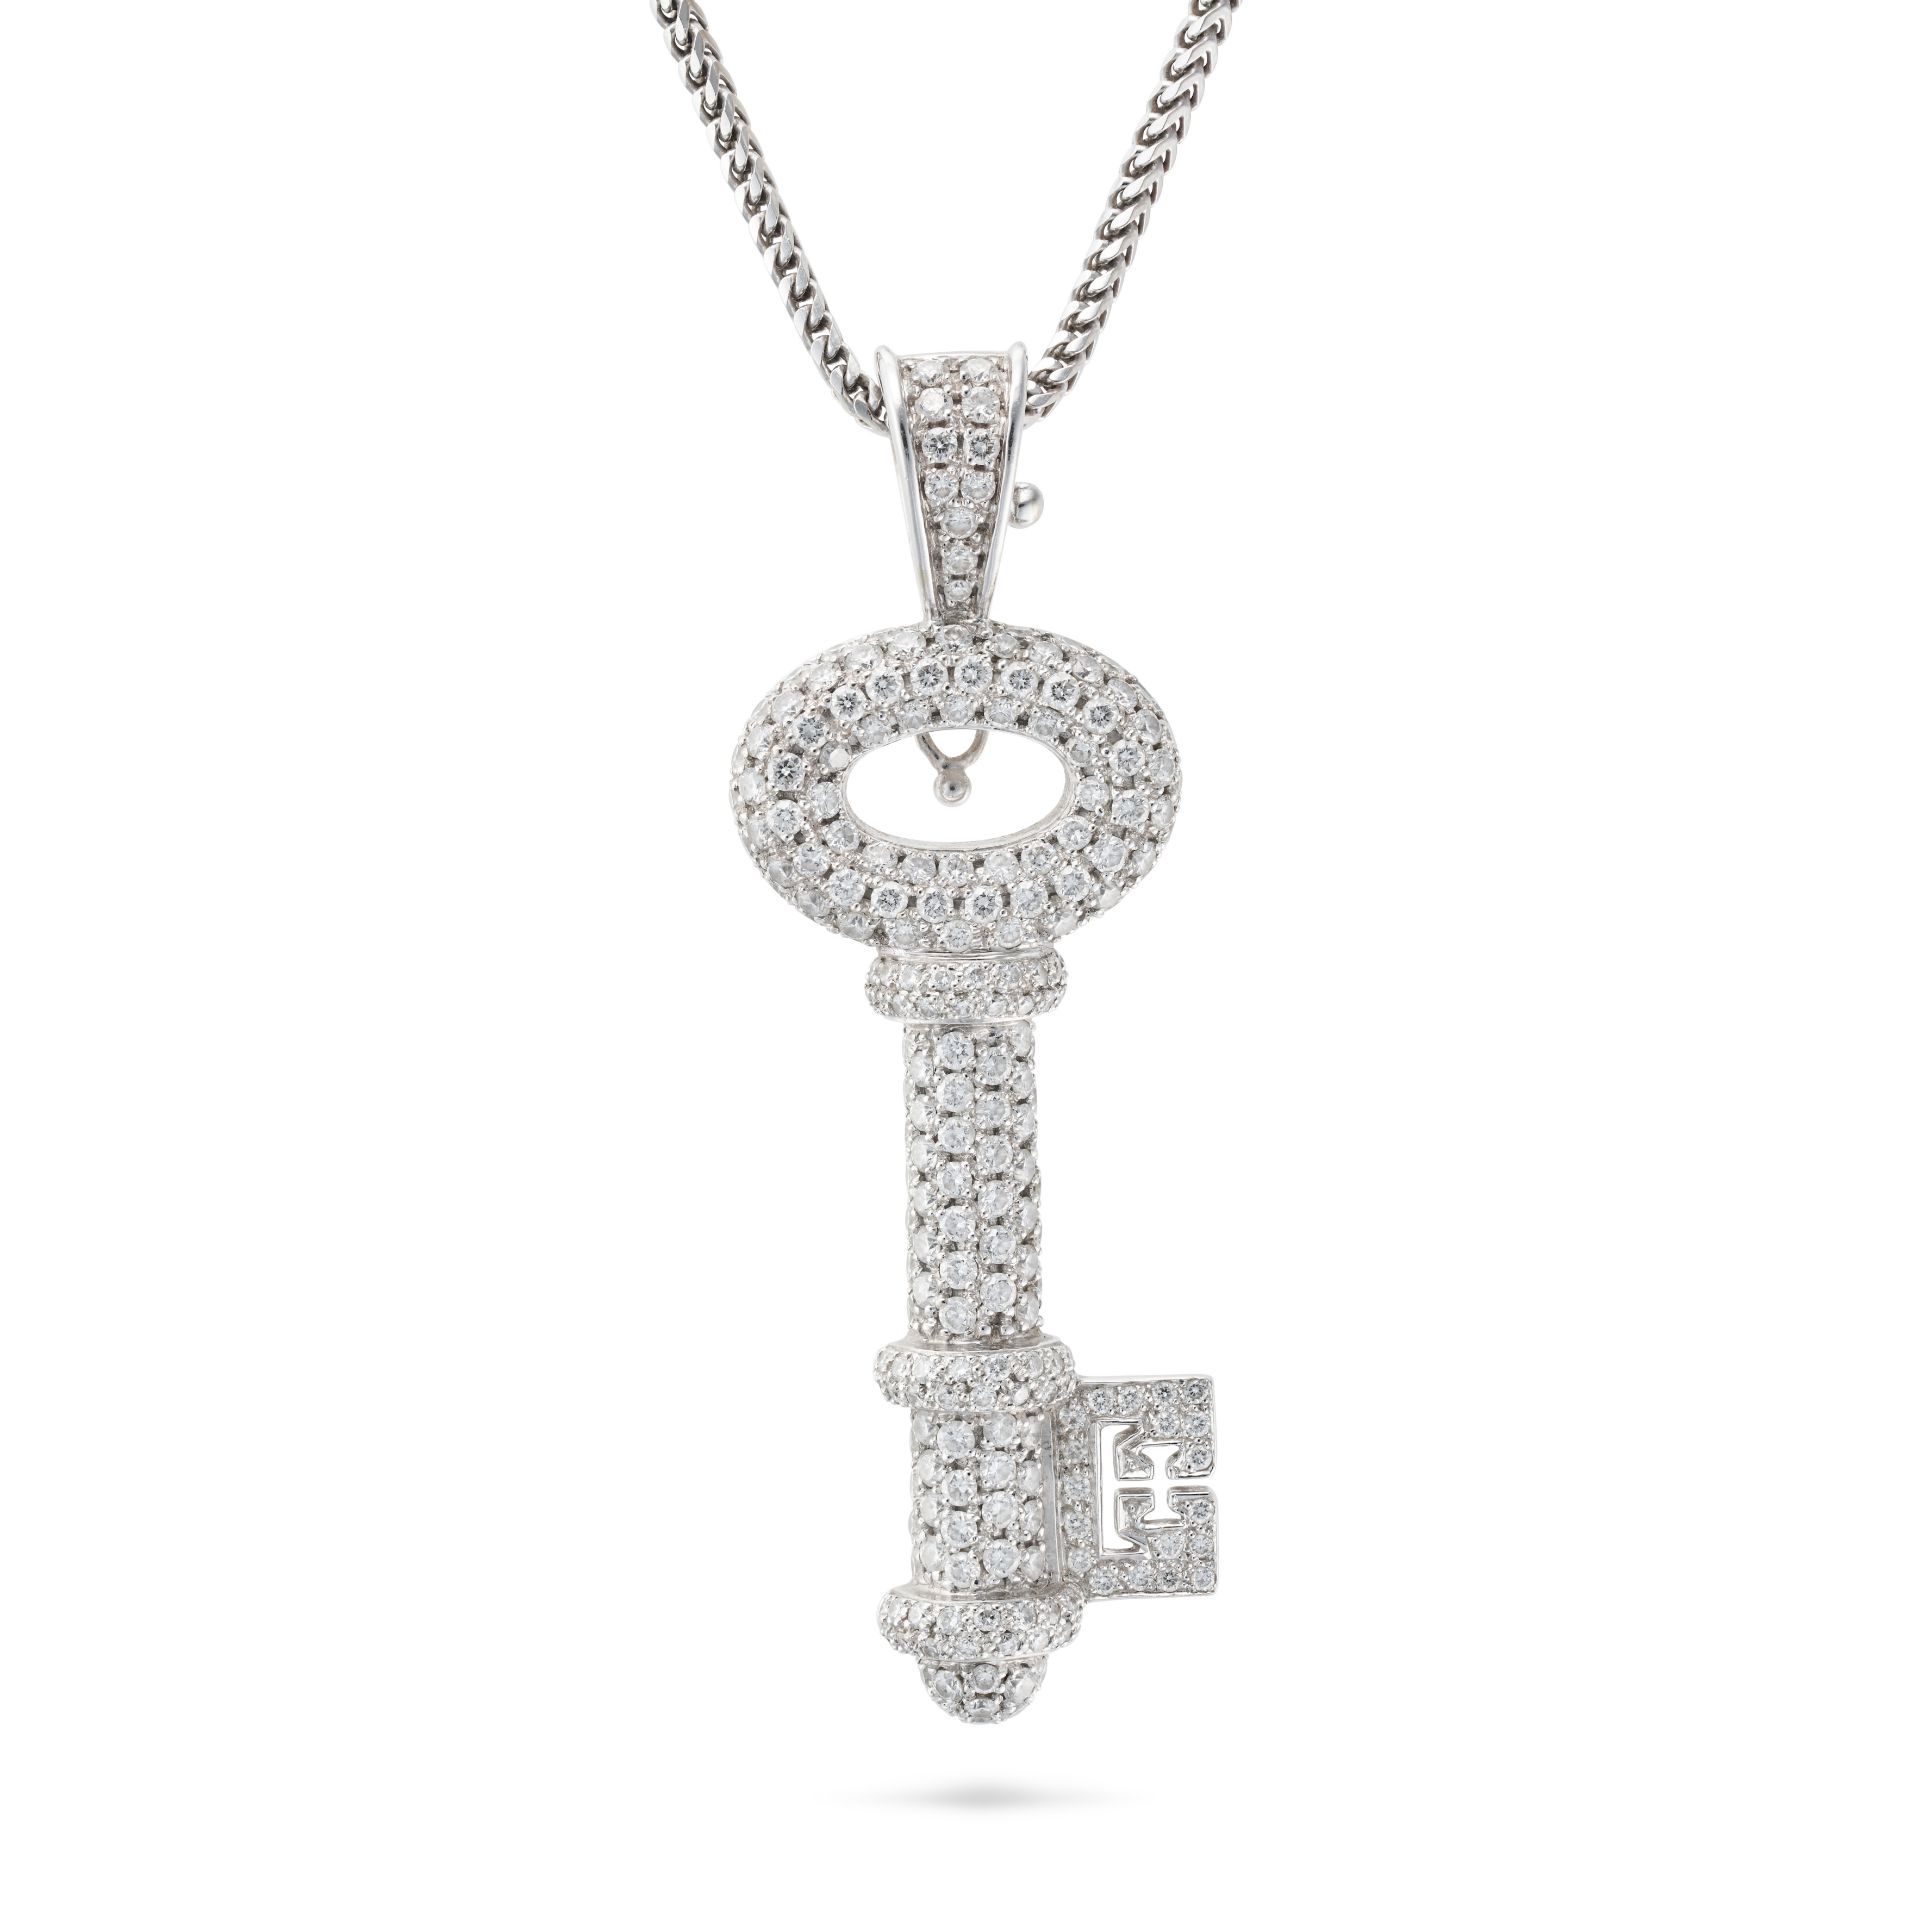 THEO FENNELL, A DIAMOND KEY PENDANT NECKLACE in 18ct white gold, the pendant designed as a key pa... - Bild 2 aus 2